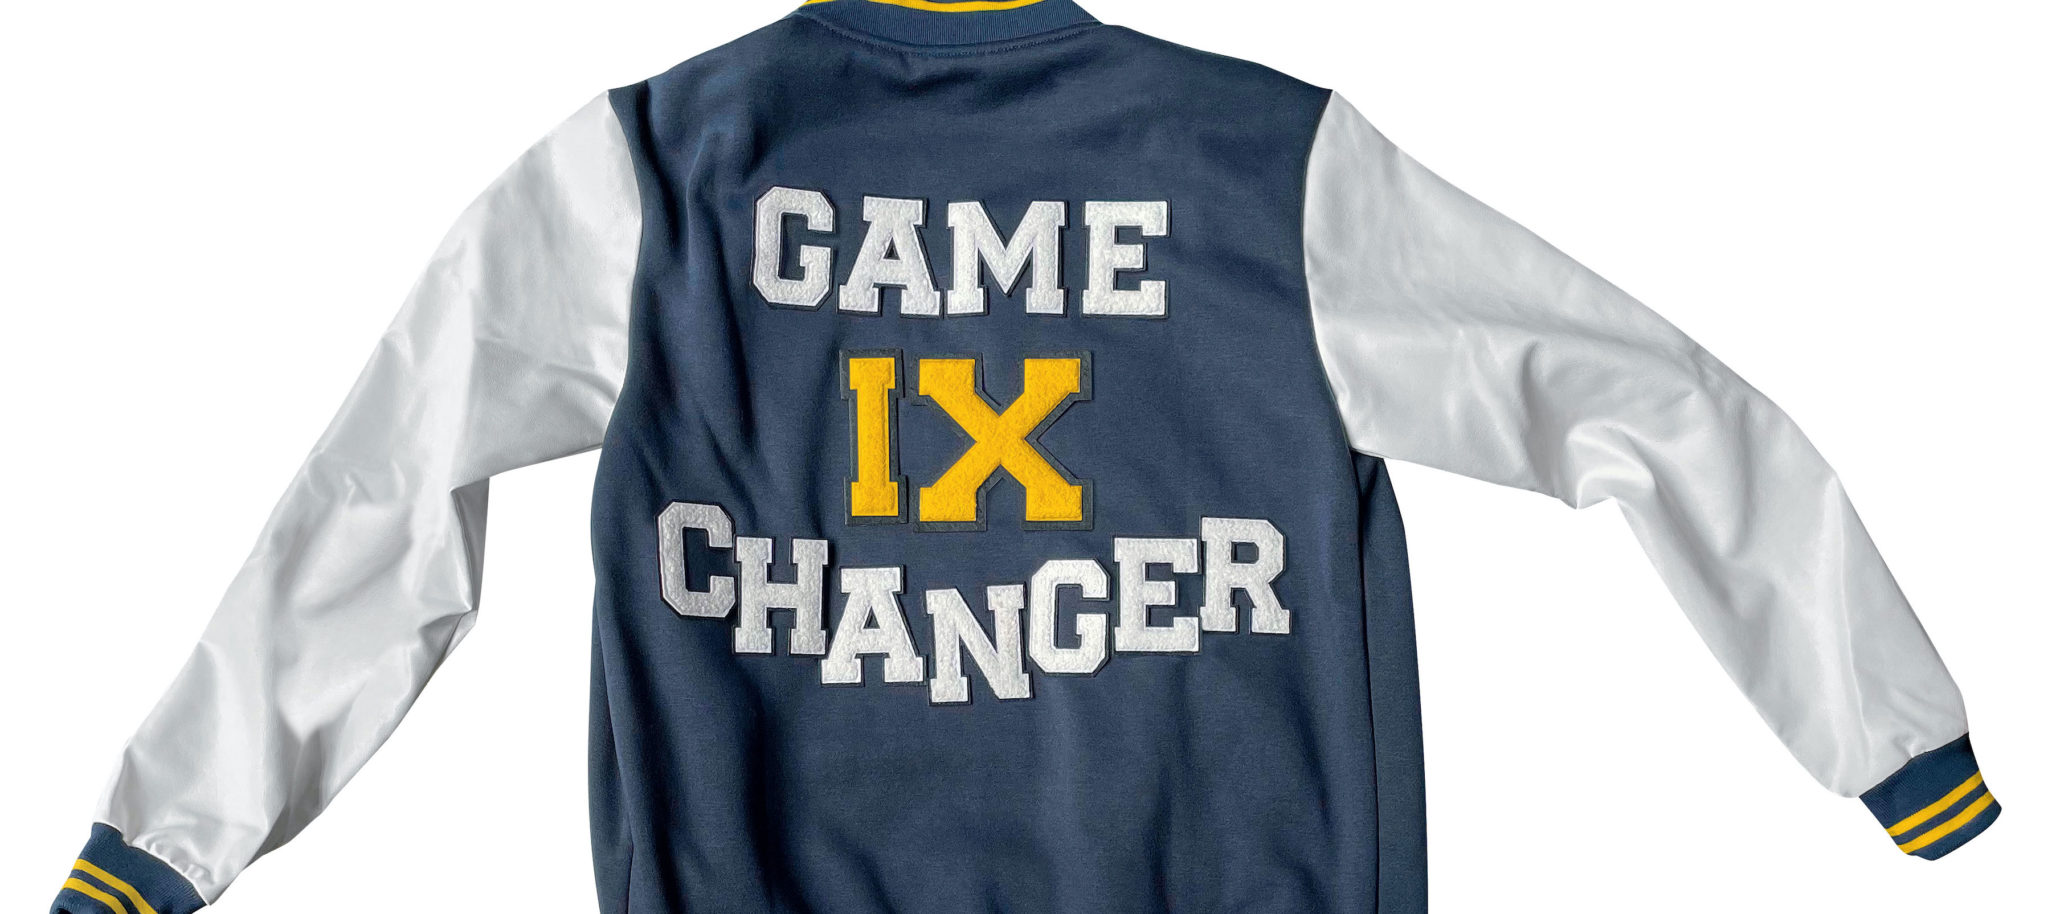 Jacket with "Game IX Changer" written on it